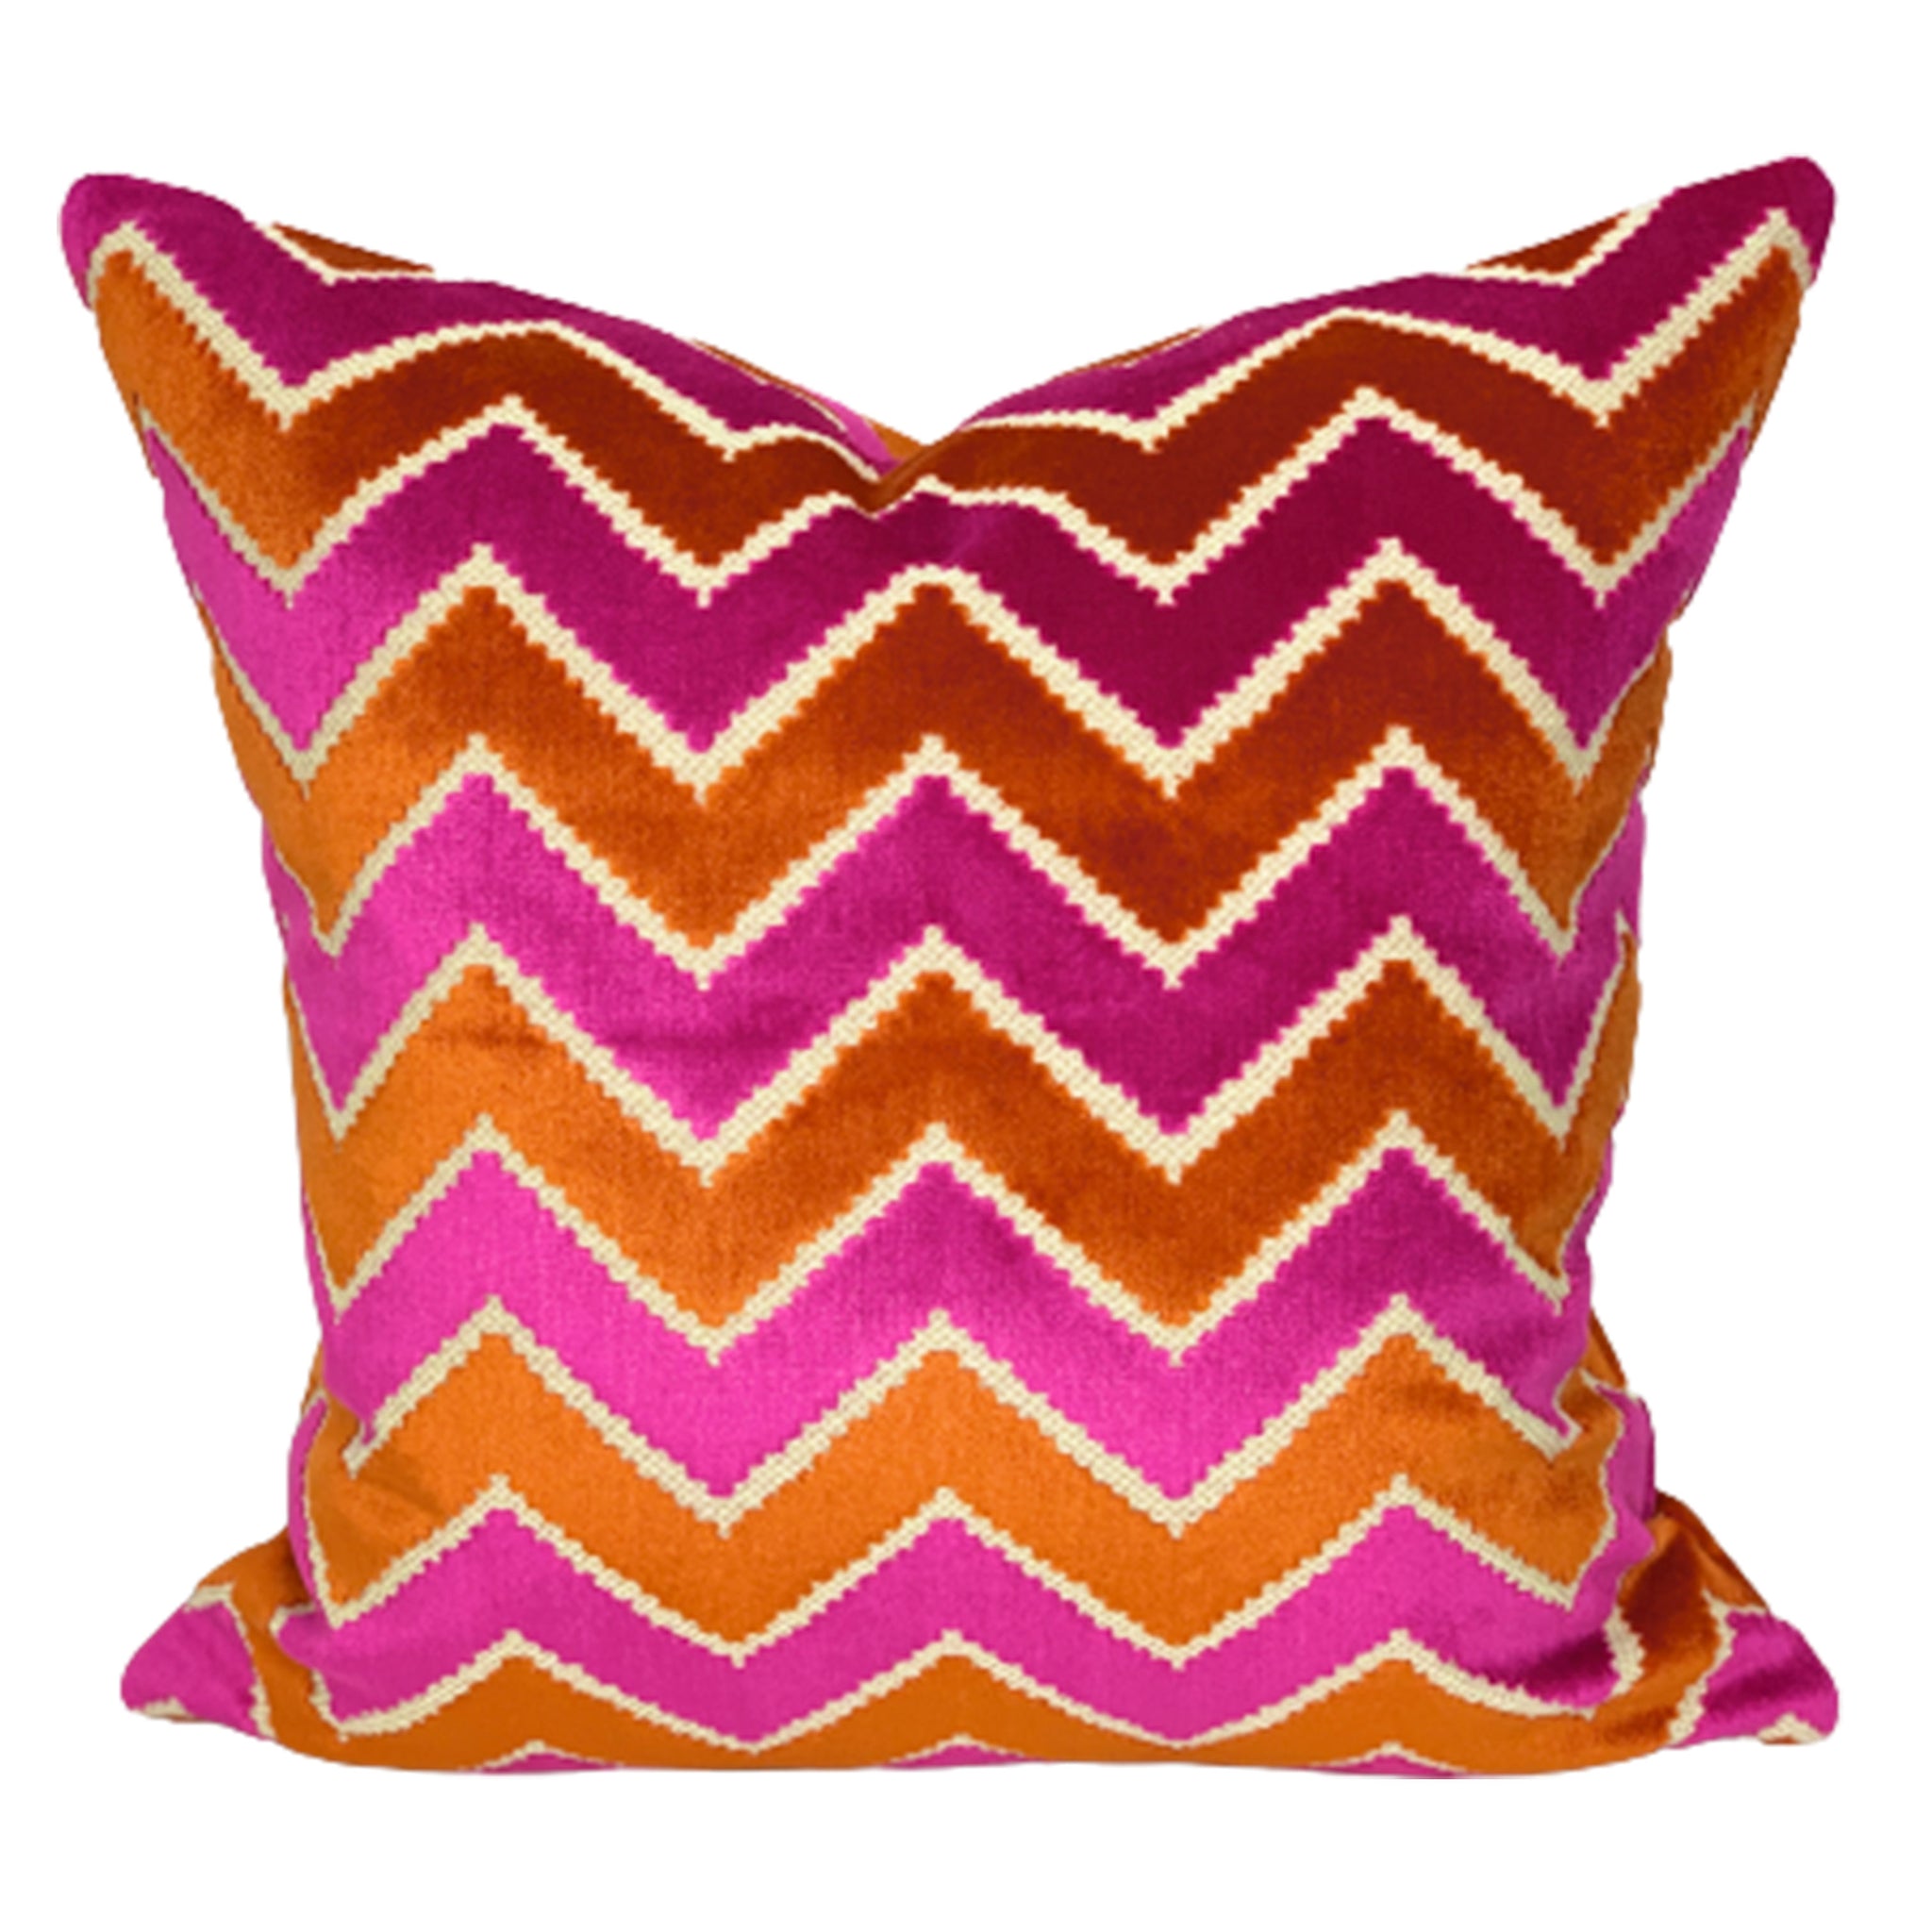 Electra Pillow Cover in Zag